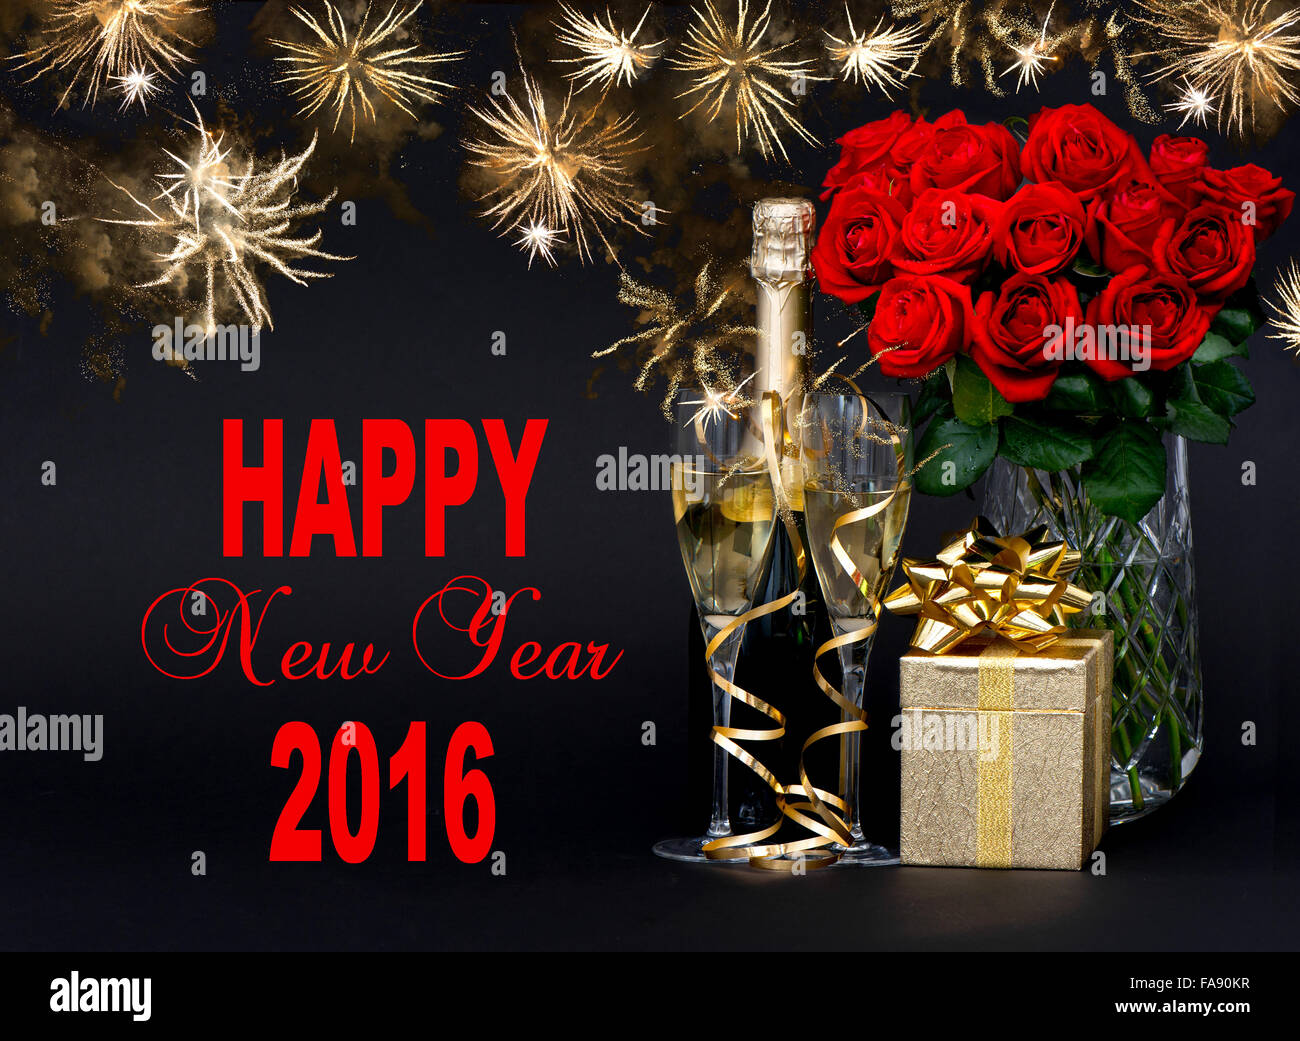 Happy New Year 2016! Greetings card concept. Red roses, bottle of champagne, golden gift. Golden fireworks on black background Stock Photo